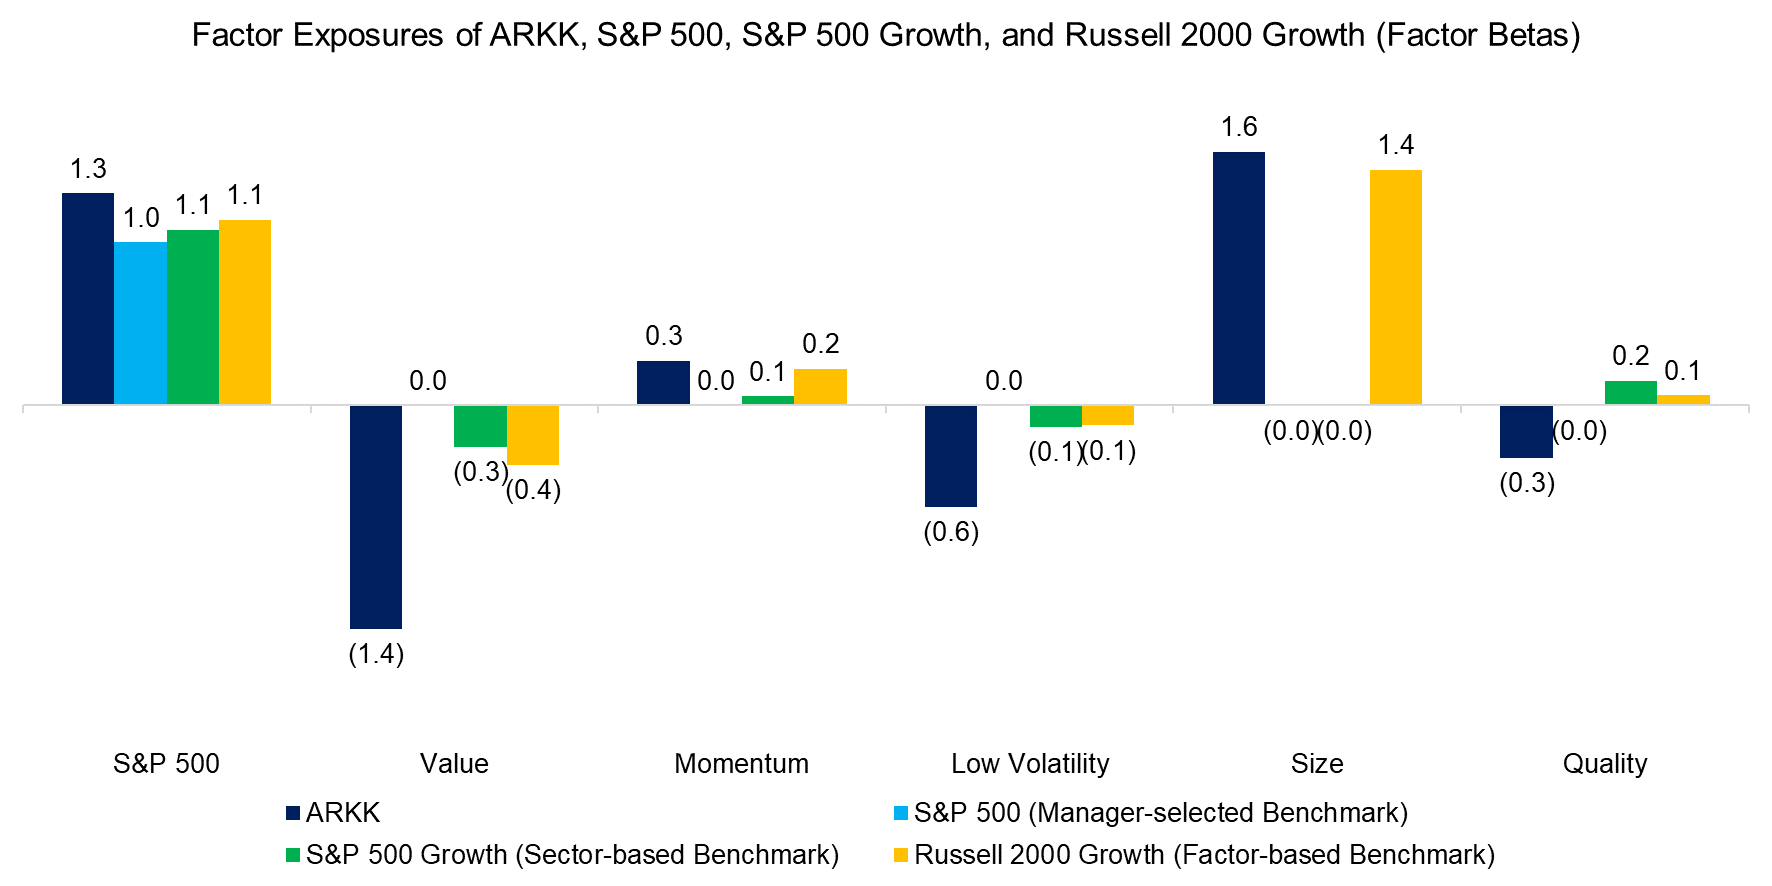 Factor Exposures of ARKK, S&P 500, S&P 500 Growth, and Russell 2000 Growth (Factor Betas)